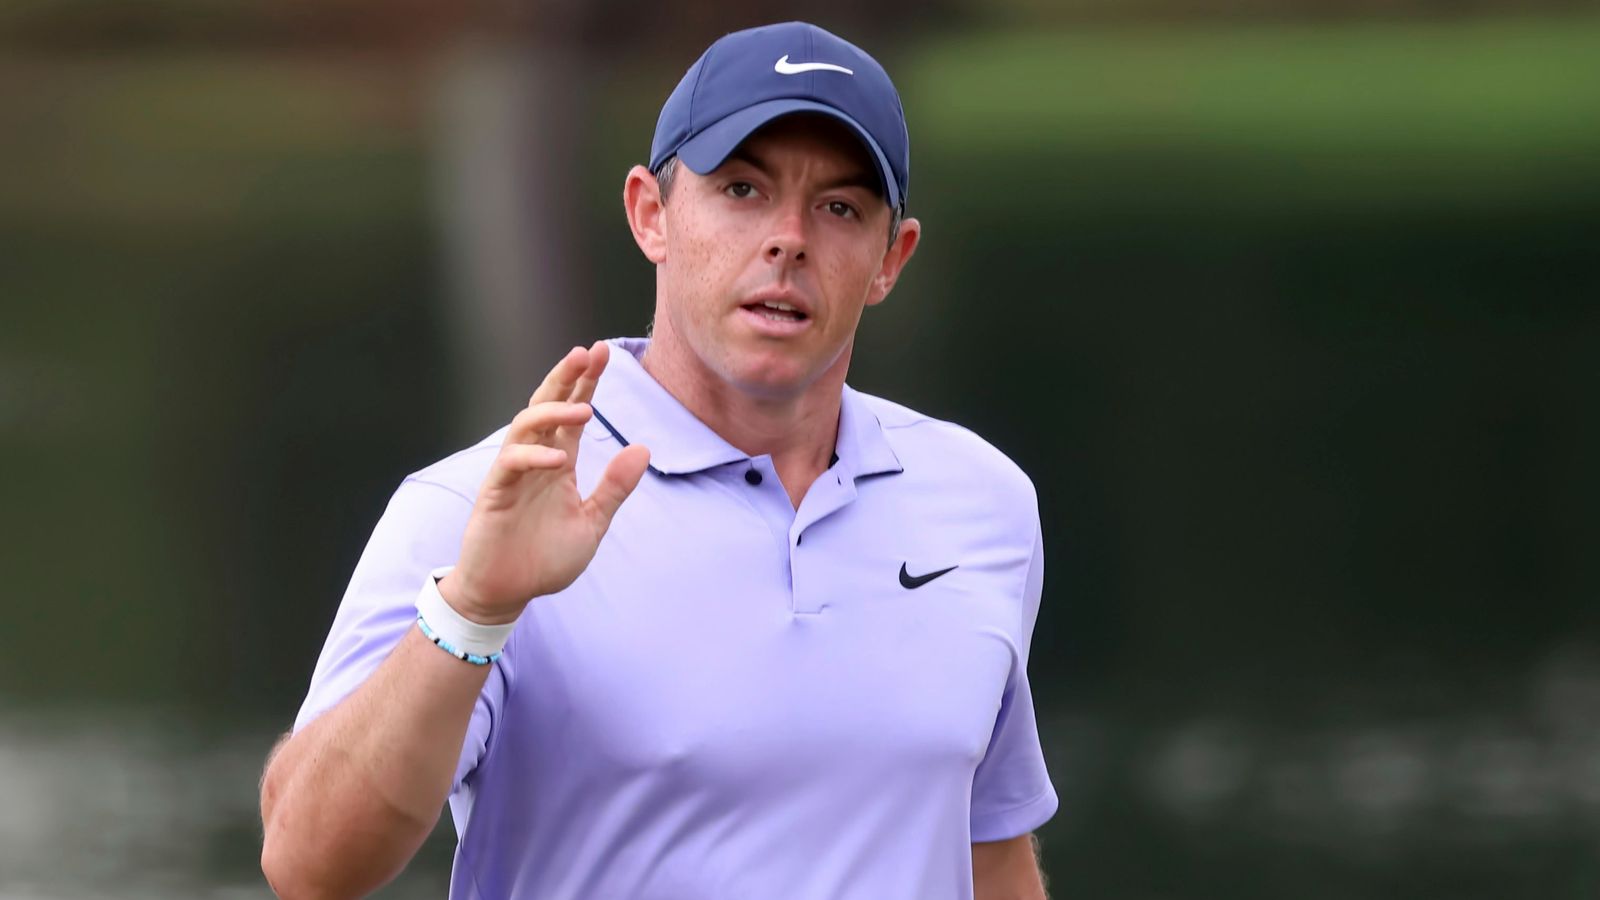 CJ Cup: Rory McIlroy eyes return to world No 1 as he gears up for title defence in South Carolina